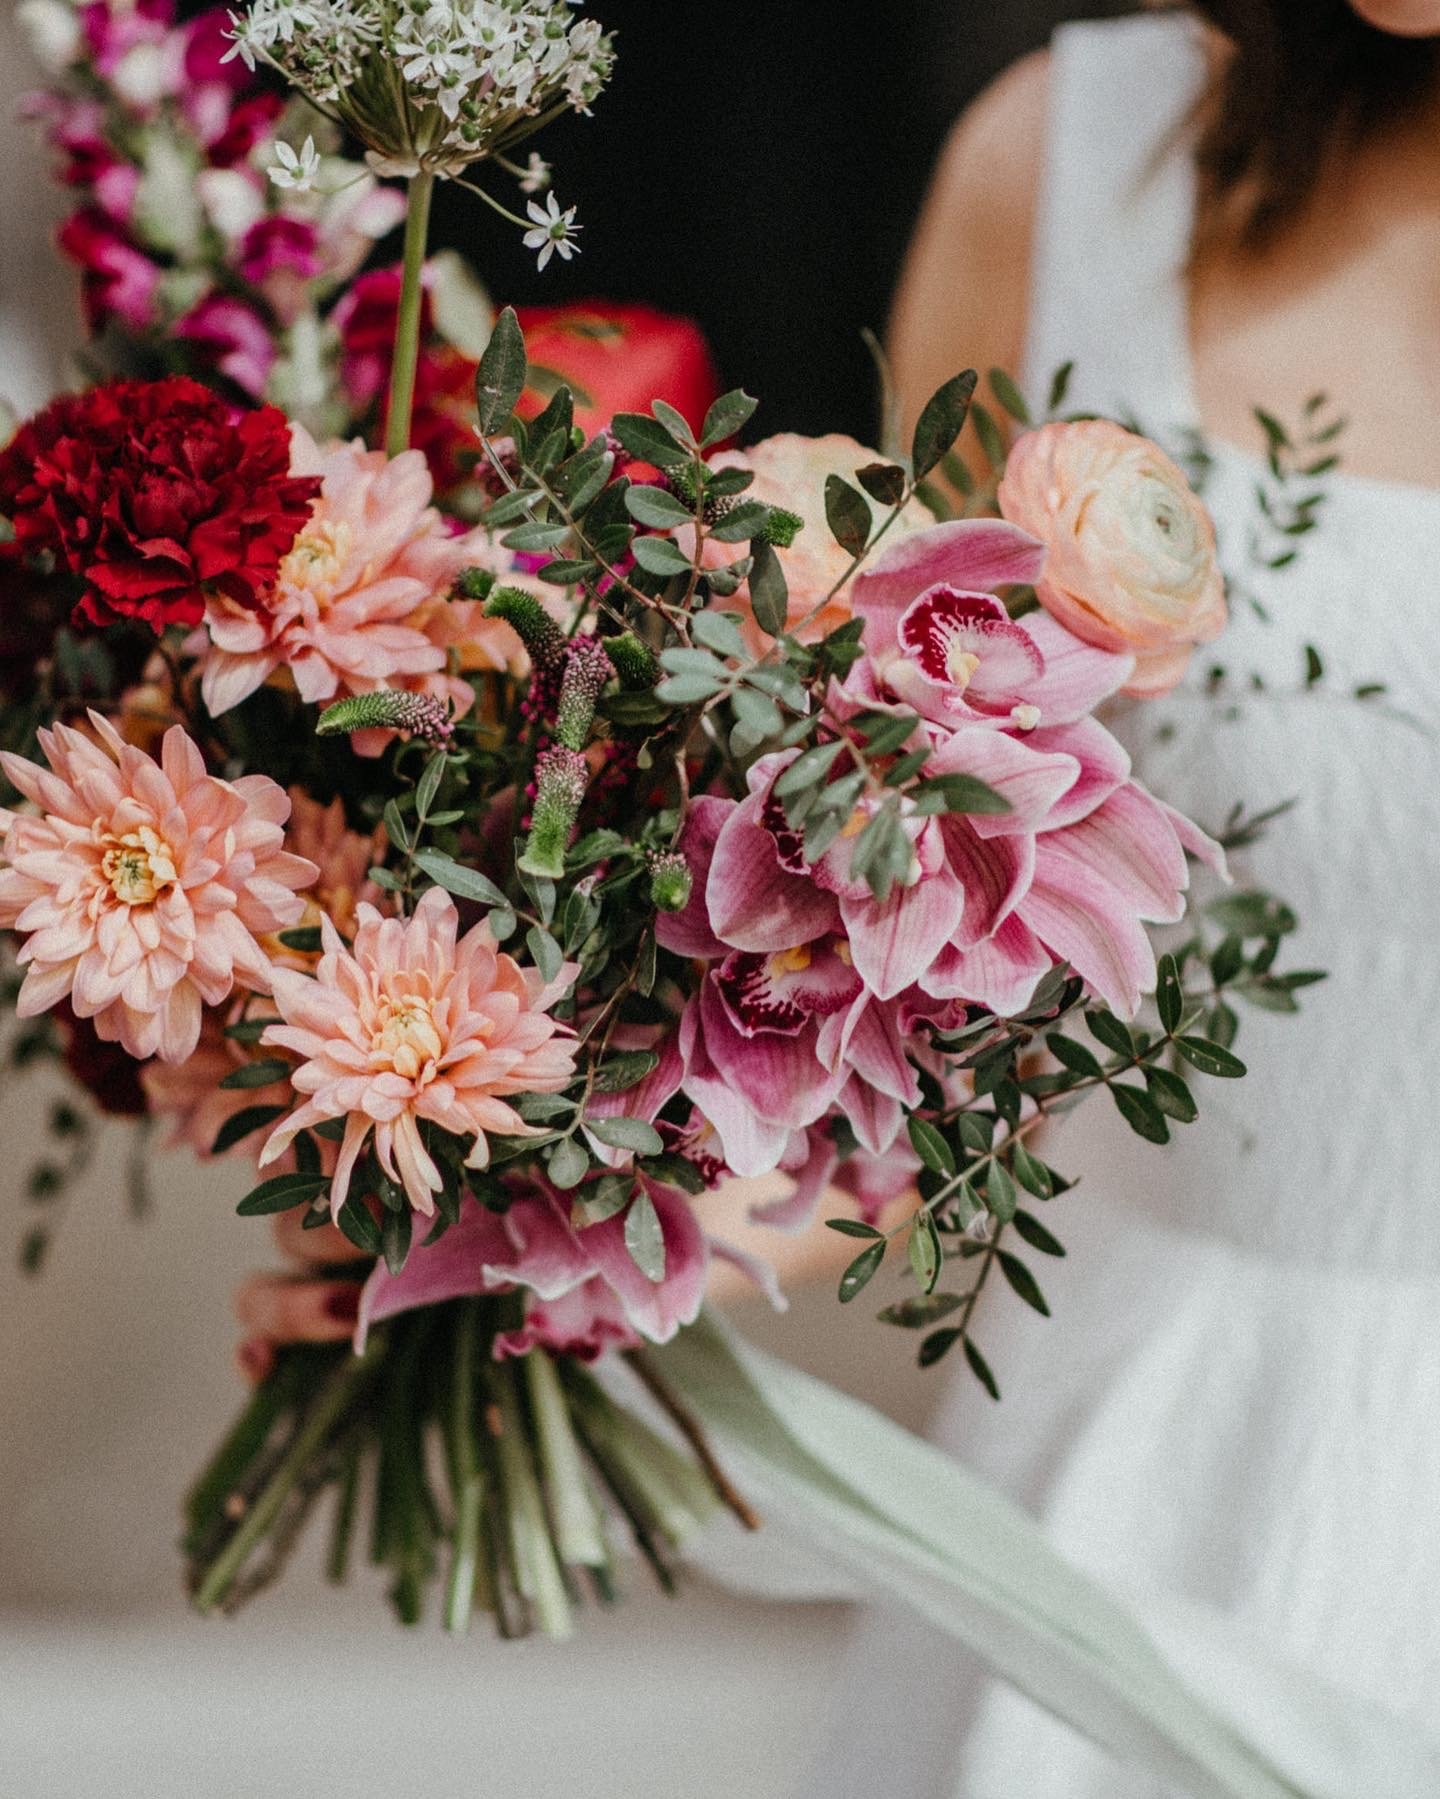  A close up image of a modern, hand-tied pink floral bridal bouquet.  Photo by Lisa Devine Photography 